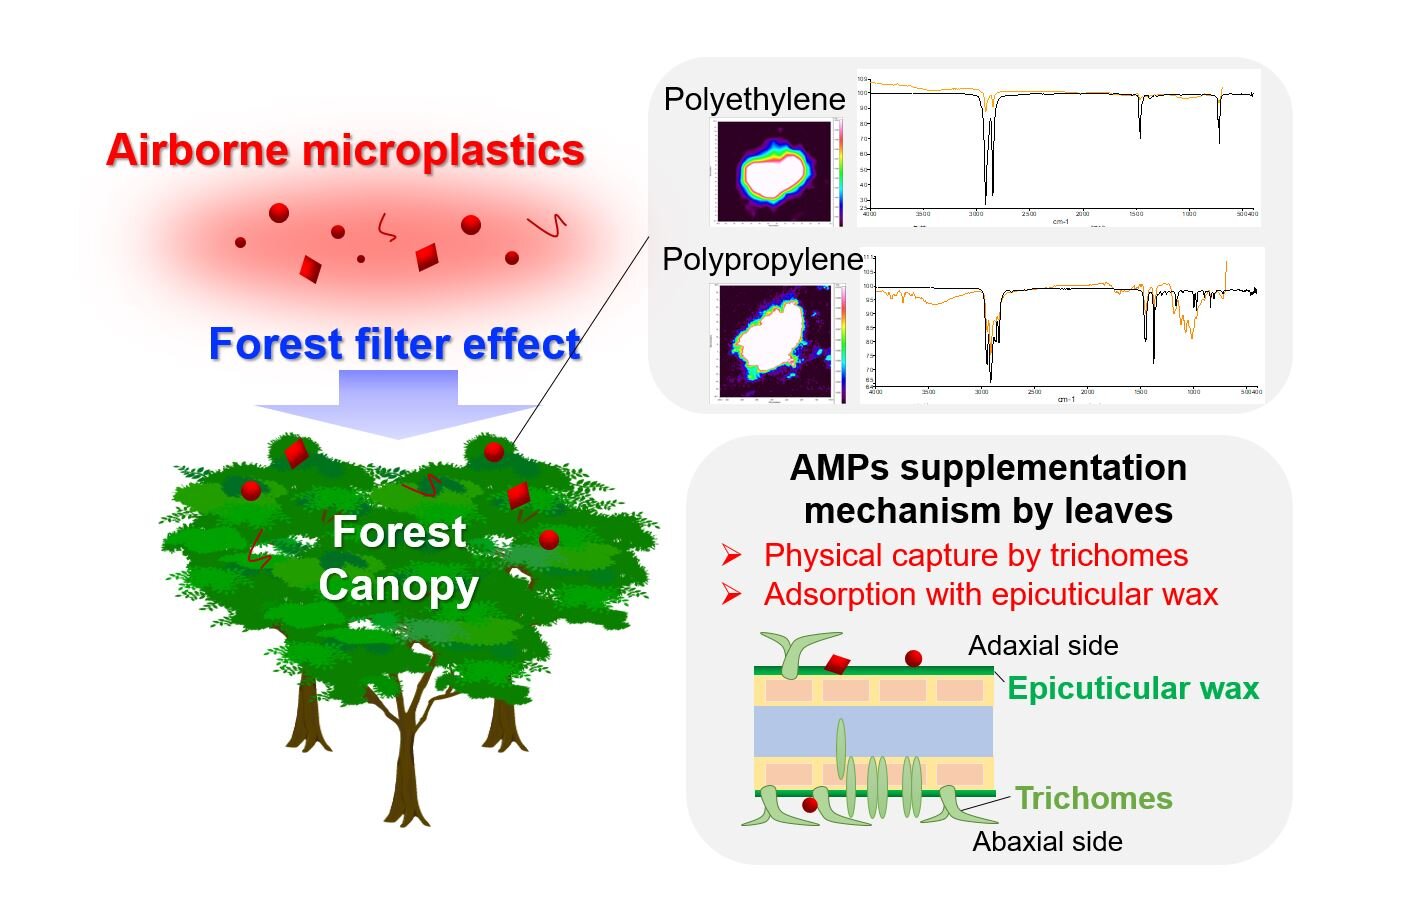 #Researchers demonstrate that forests trap airborne microplastics, acting as terrestrial sinks